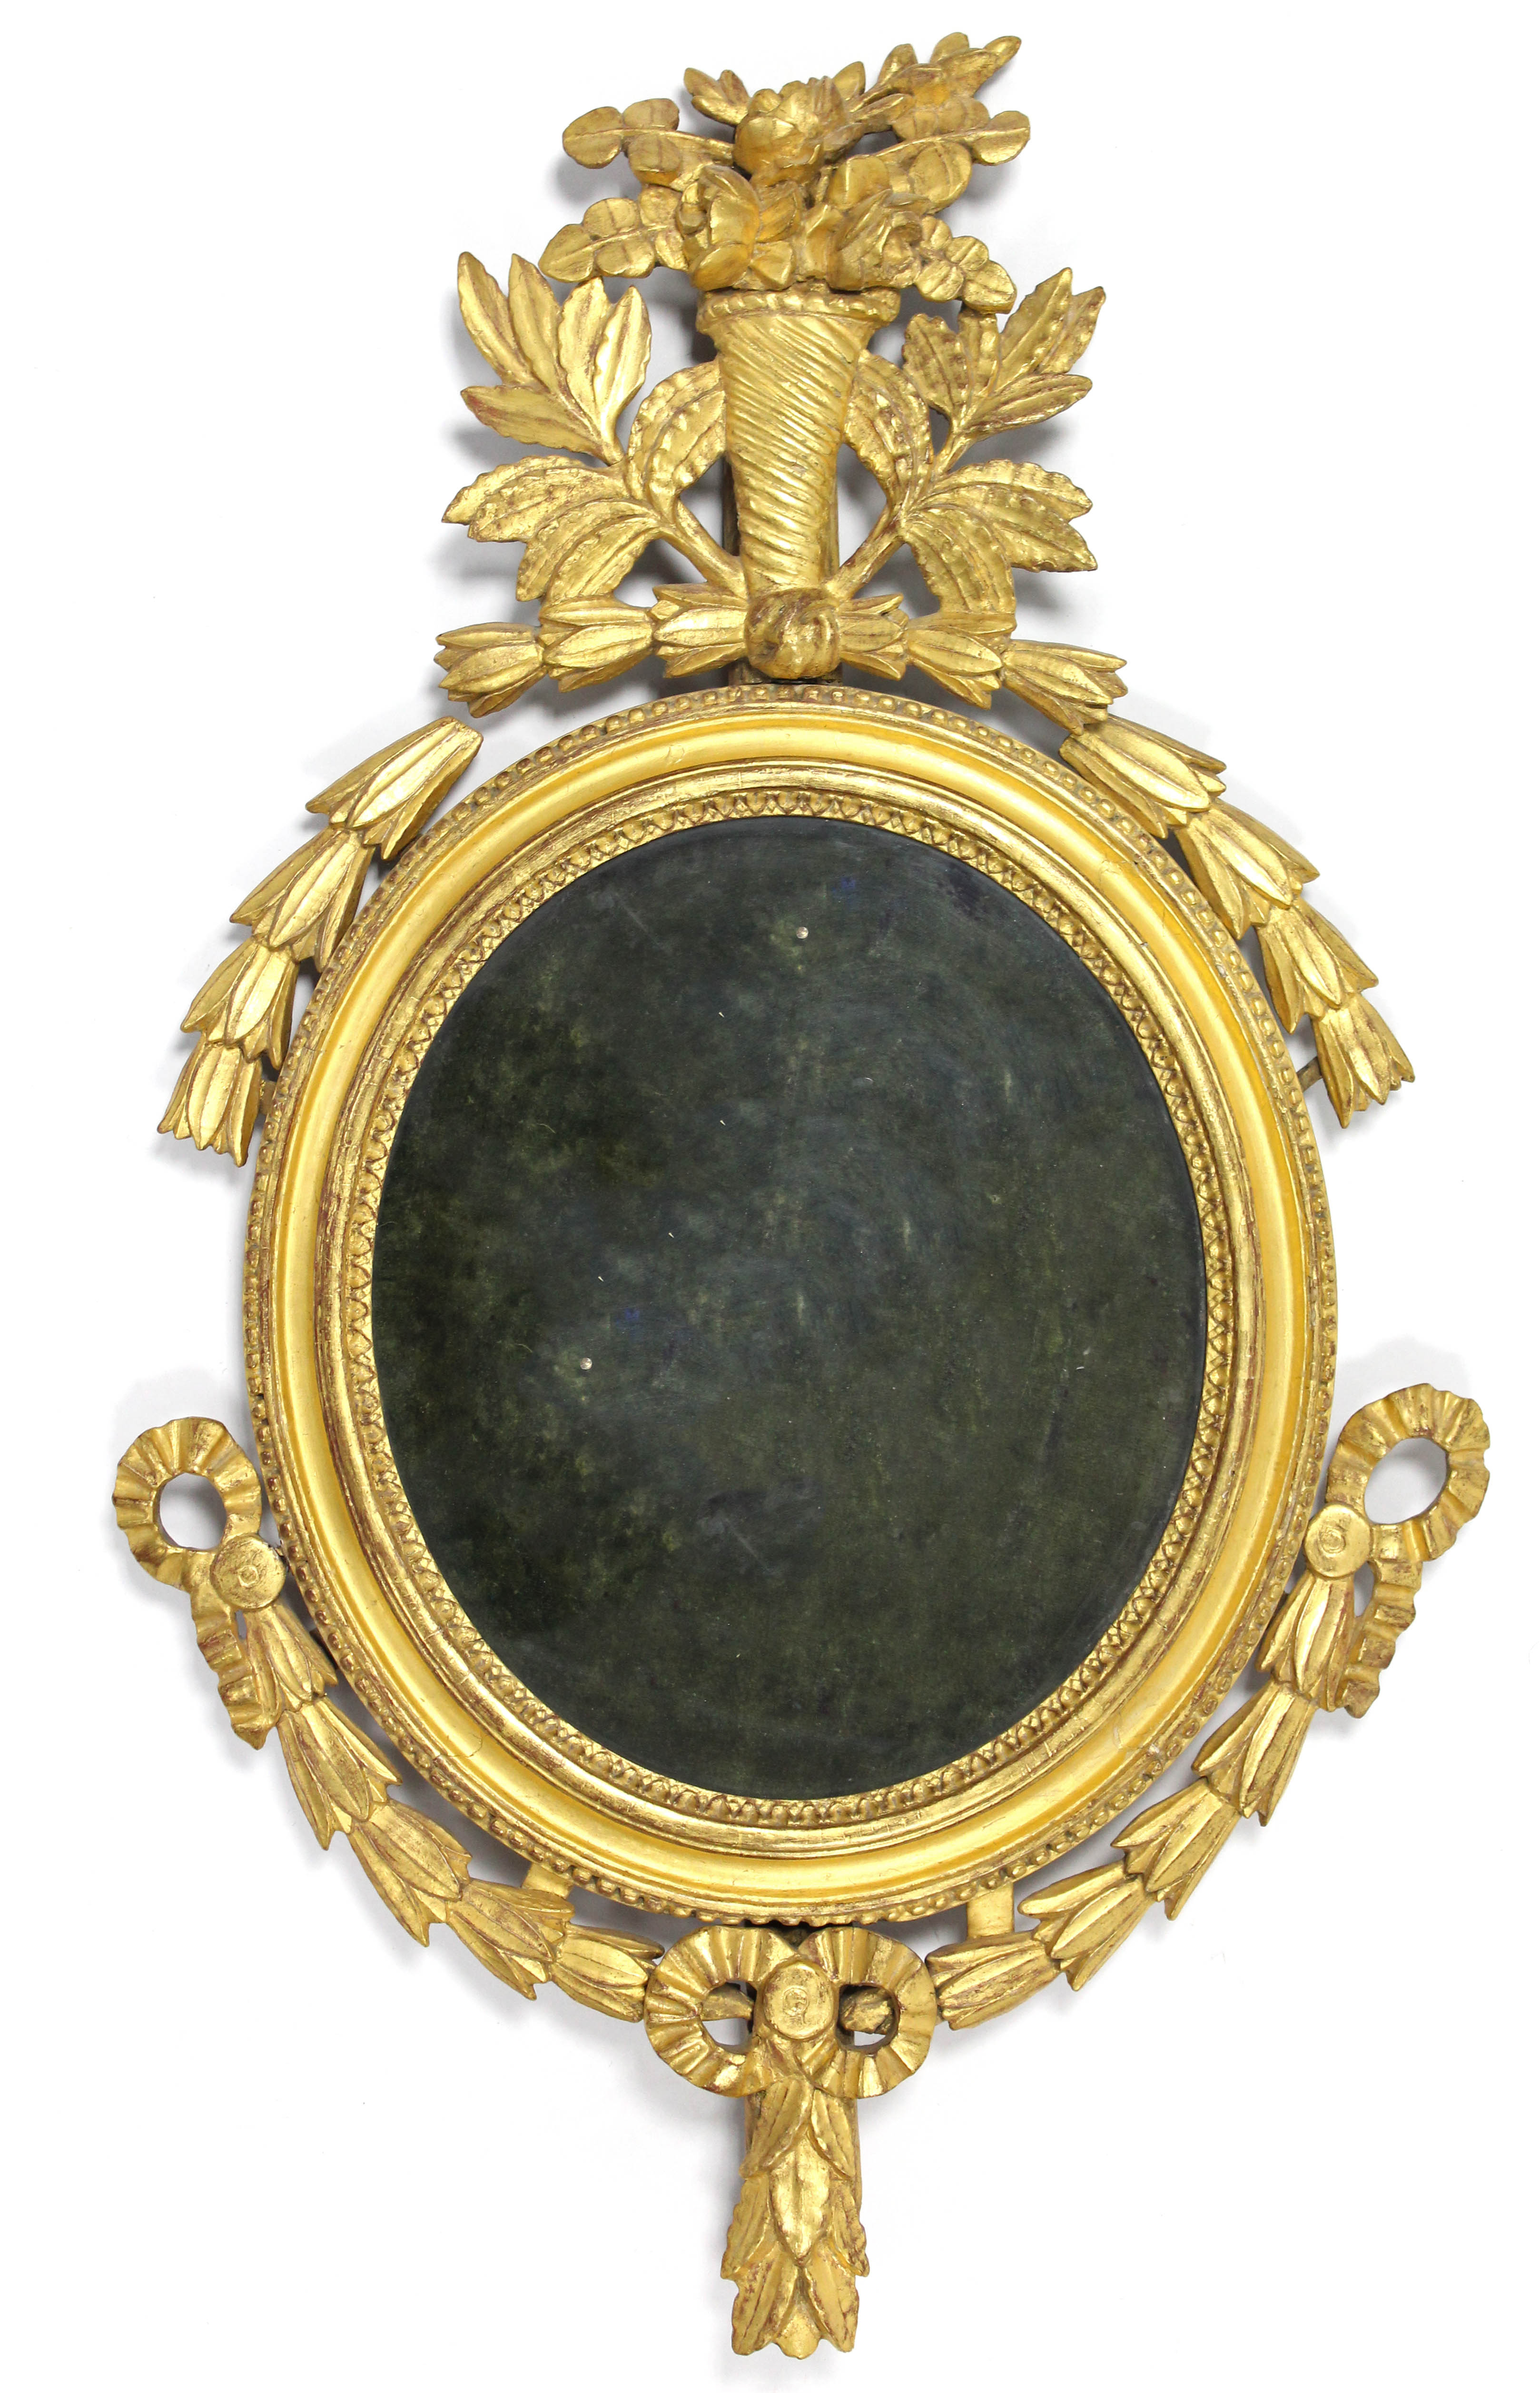 A LATE 18th century CARVED GILTWOOD OVAL FRAME FOR DISPLAYING PORTRAIT MINIATURES, with floral,